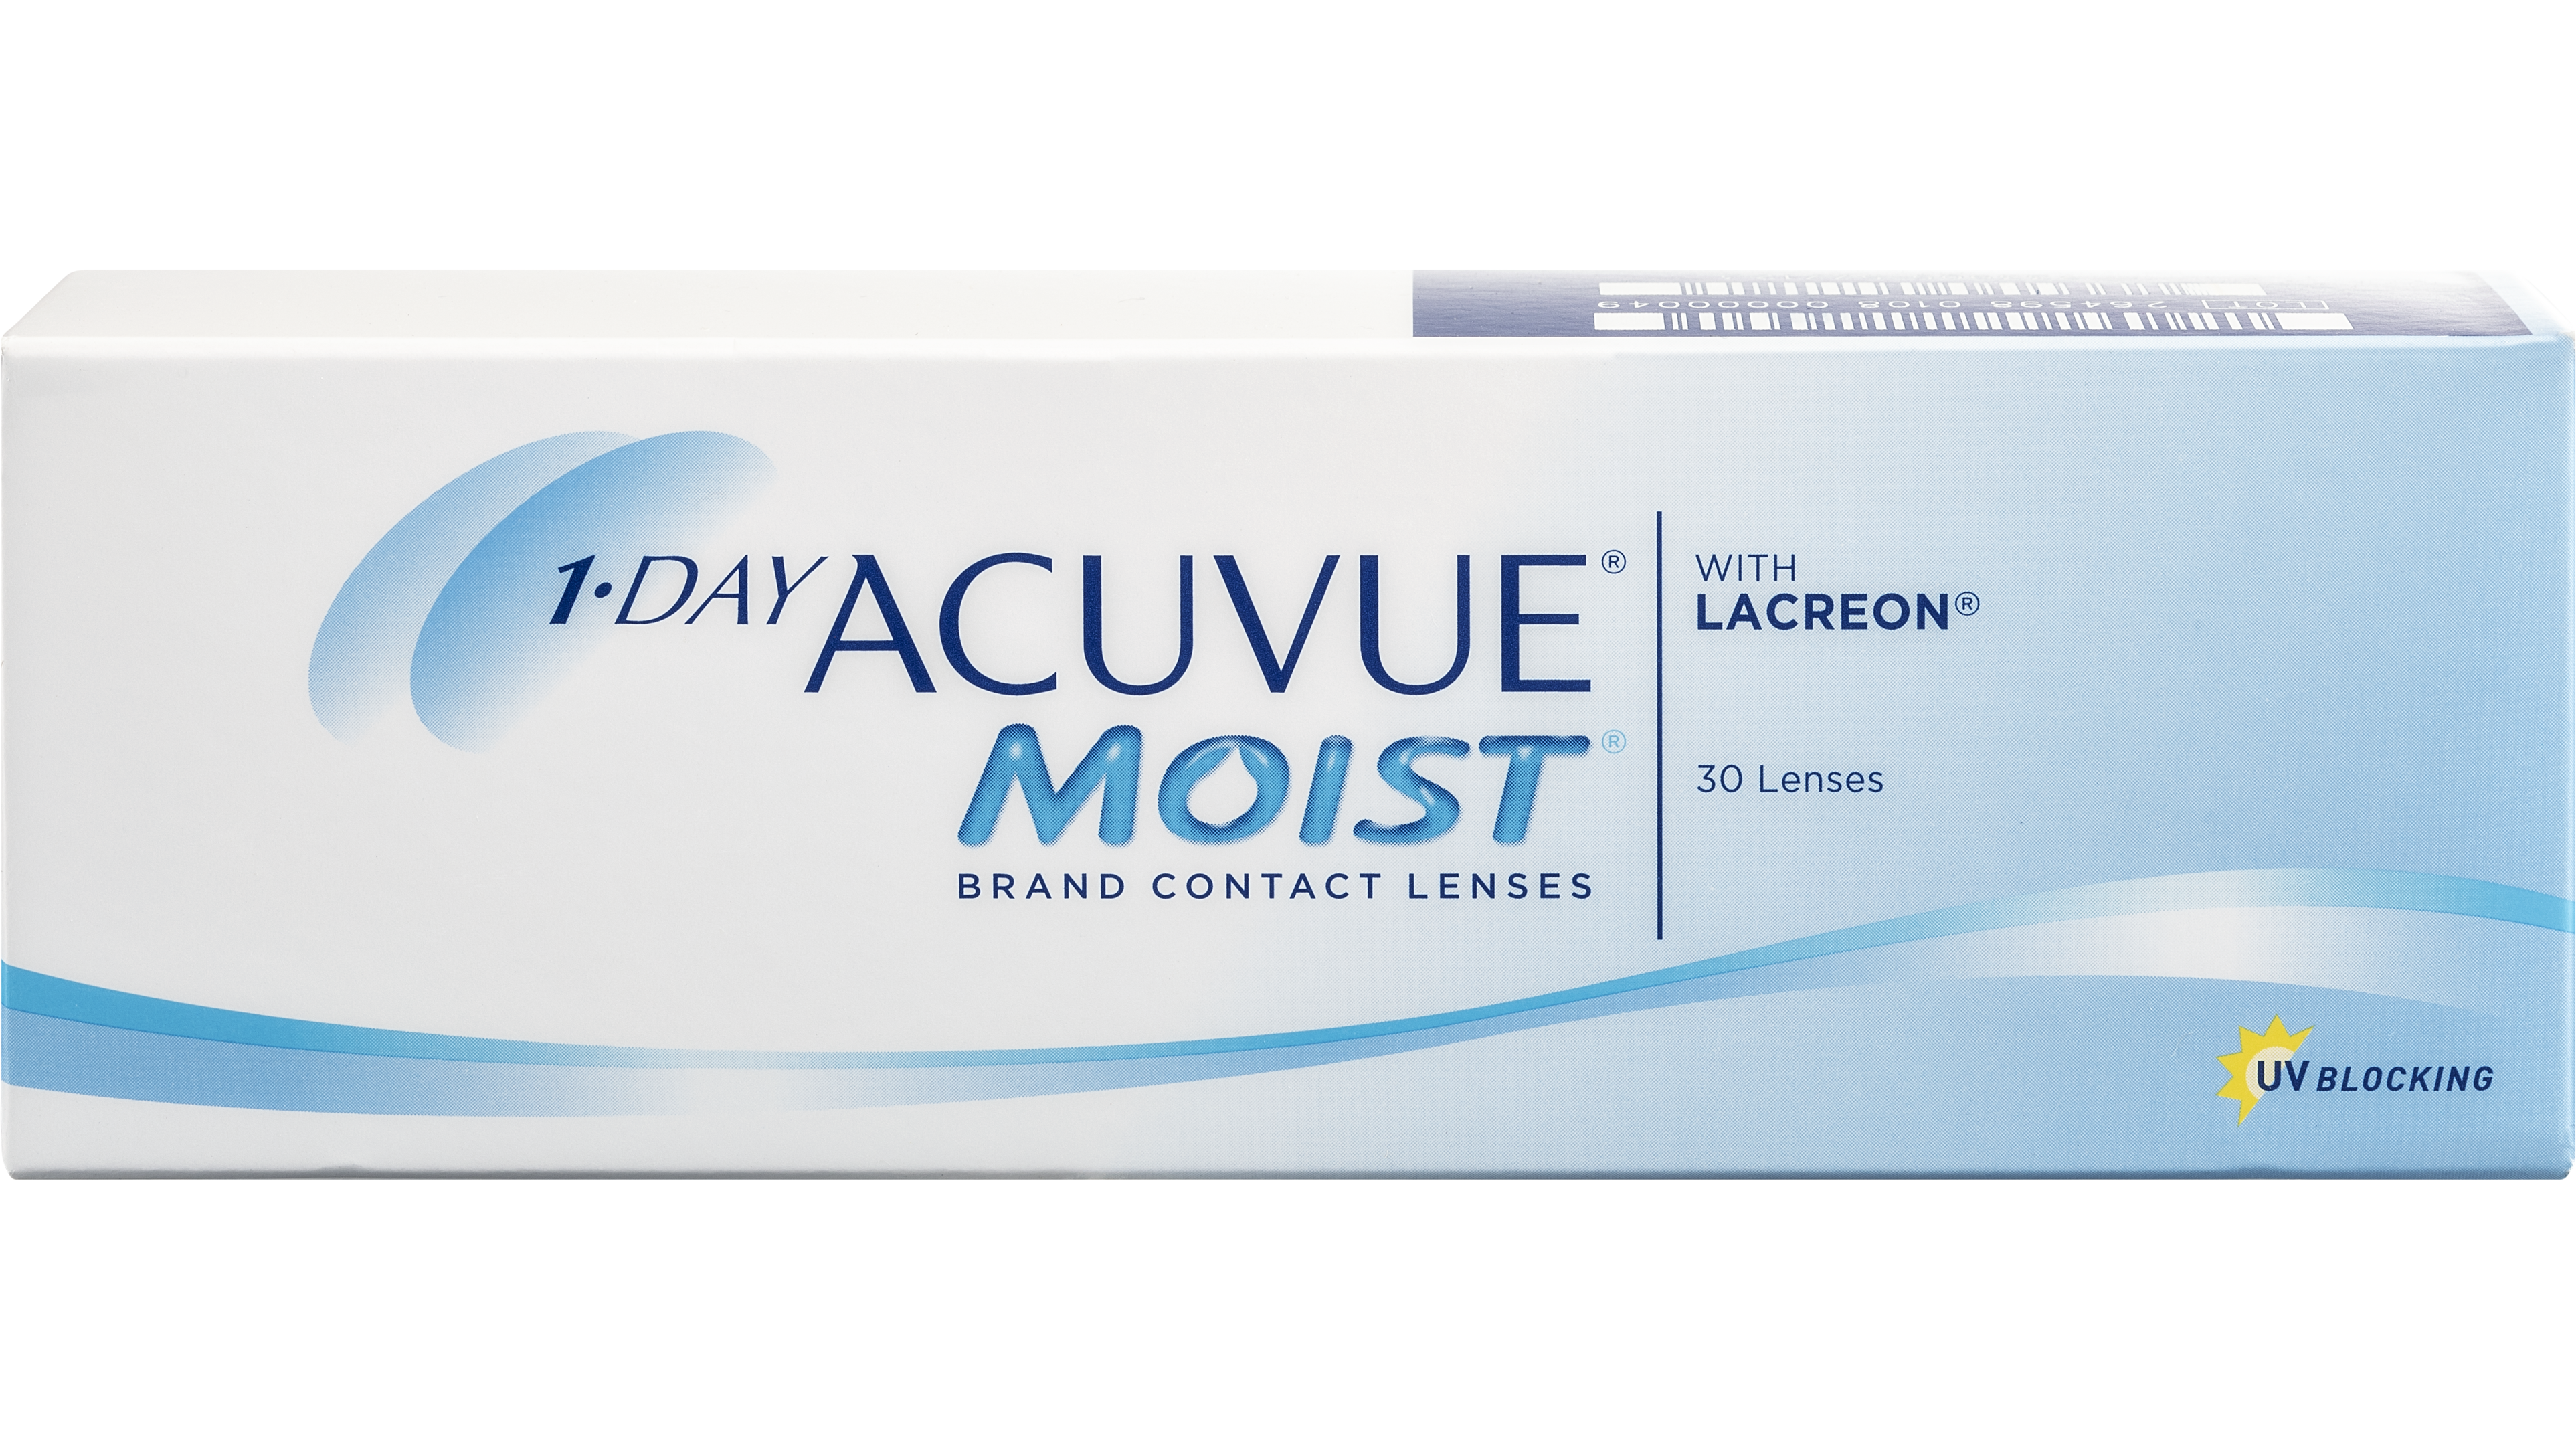 Front 1 Day Acuvue Moist